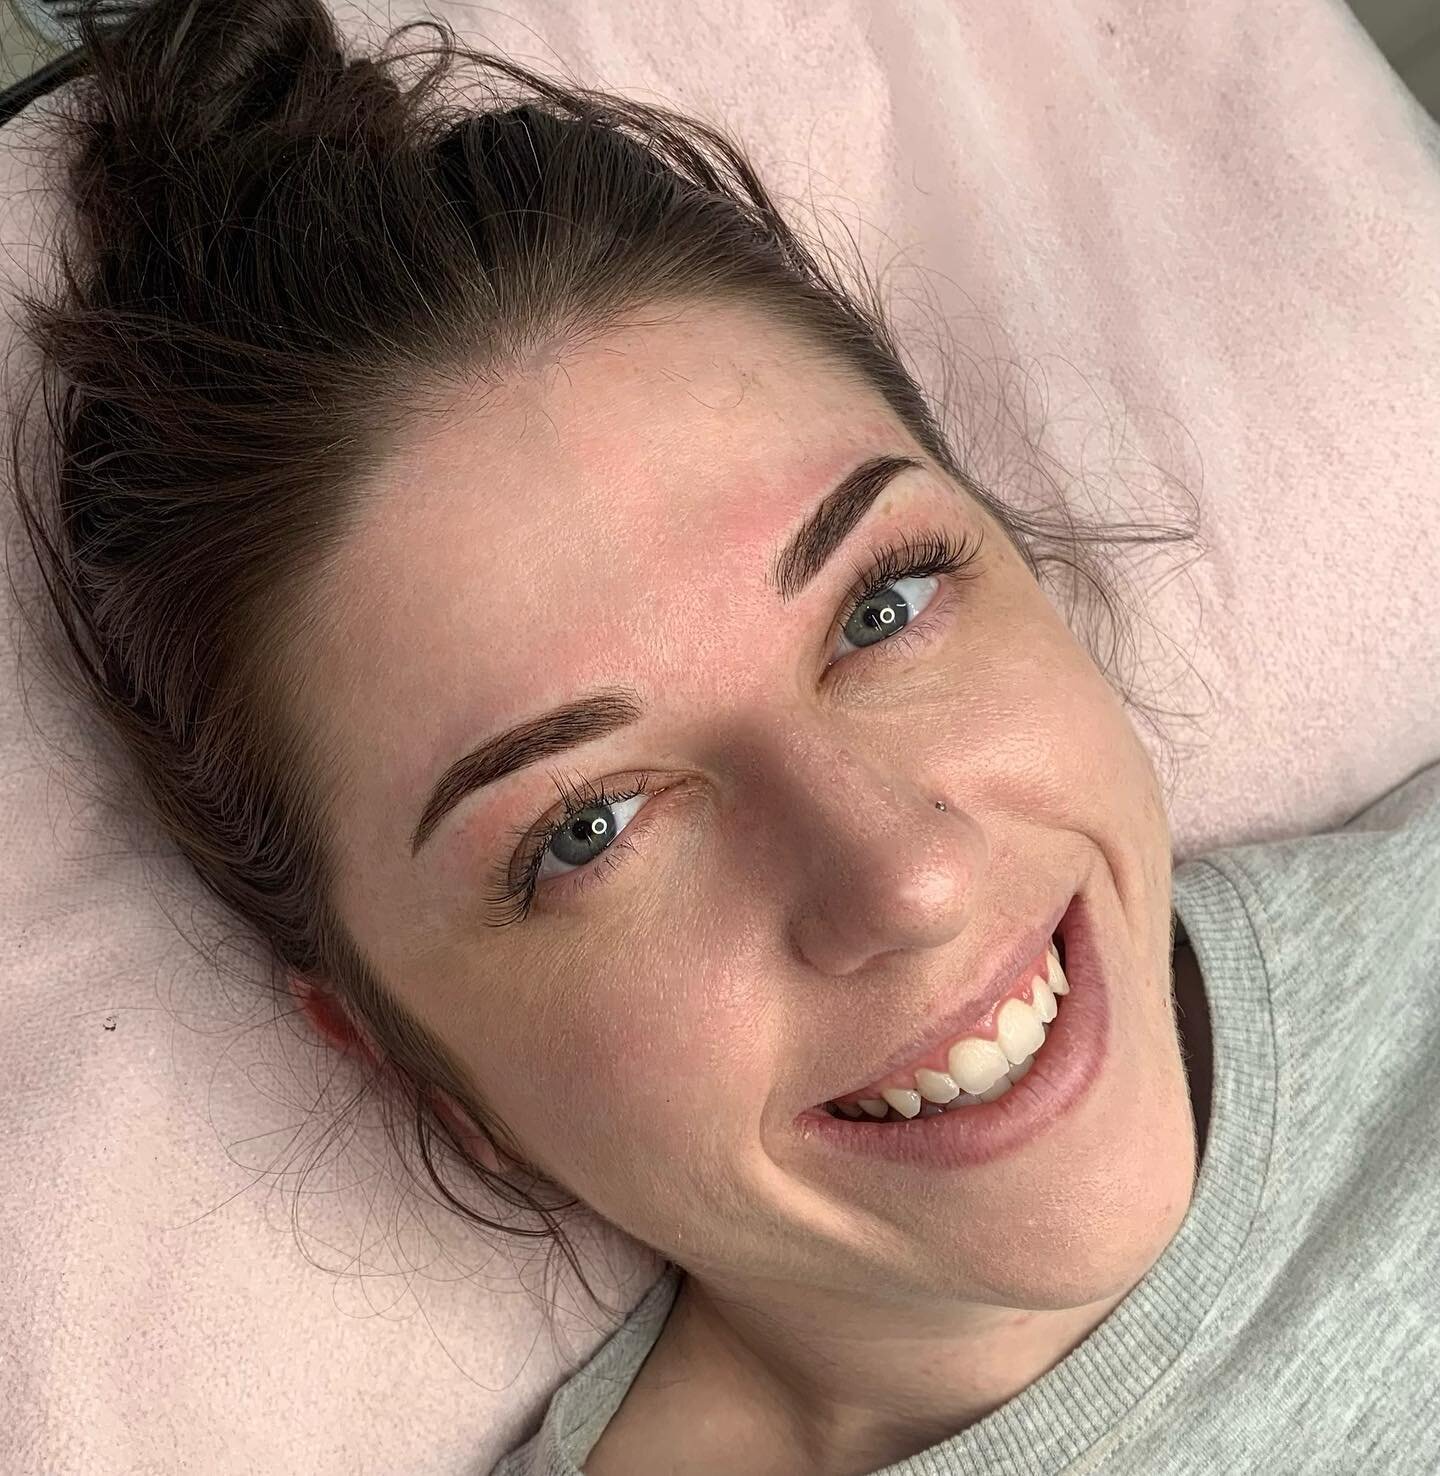 A beautiful big smile from Chay for her new cosmetic tattooed powder brows 🌟
She had a great natural shape to work with! We lengthened the tails a little abs made them nice and sharp, gently blending them in to soft inners.